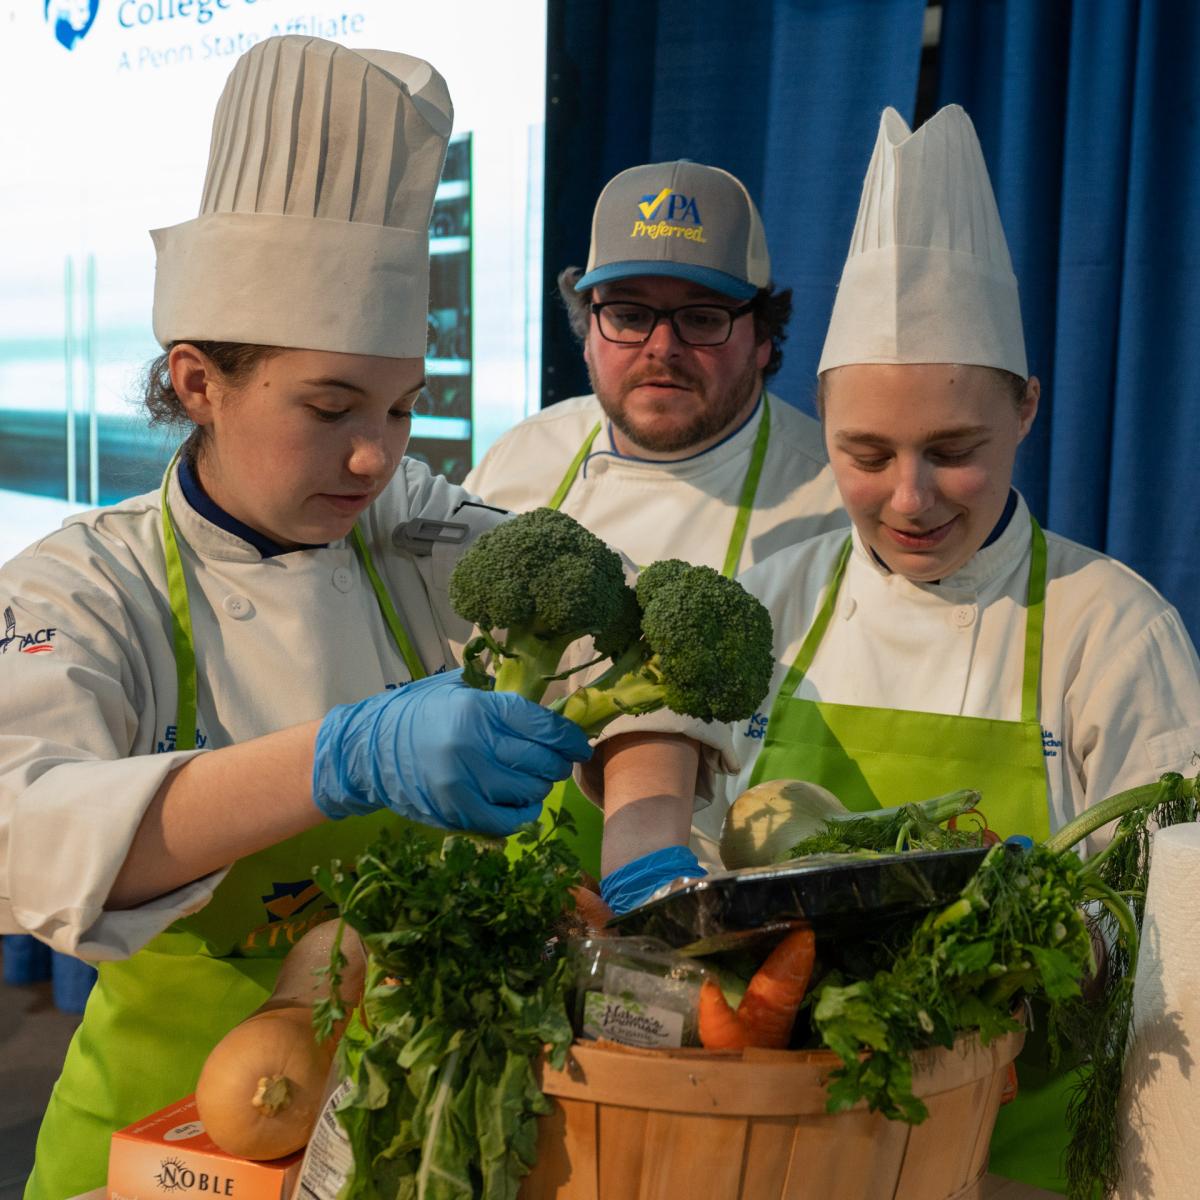 Chef Mike Dinan, executive chef of the college’s Le Jeune Chef Restaurant, looks on as students Emily Myers, of Catawissa, and Kendal L. Johnson, of Scranton, explore their basket of ingredients. Both are studying baking & pastry arts.